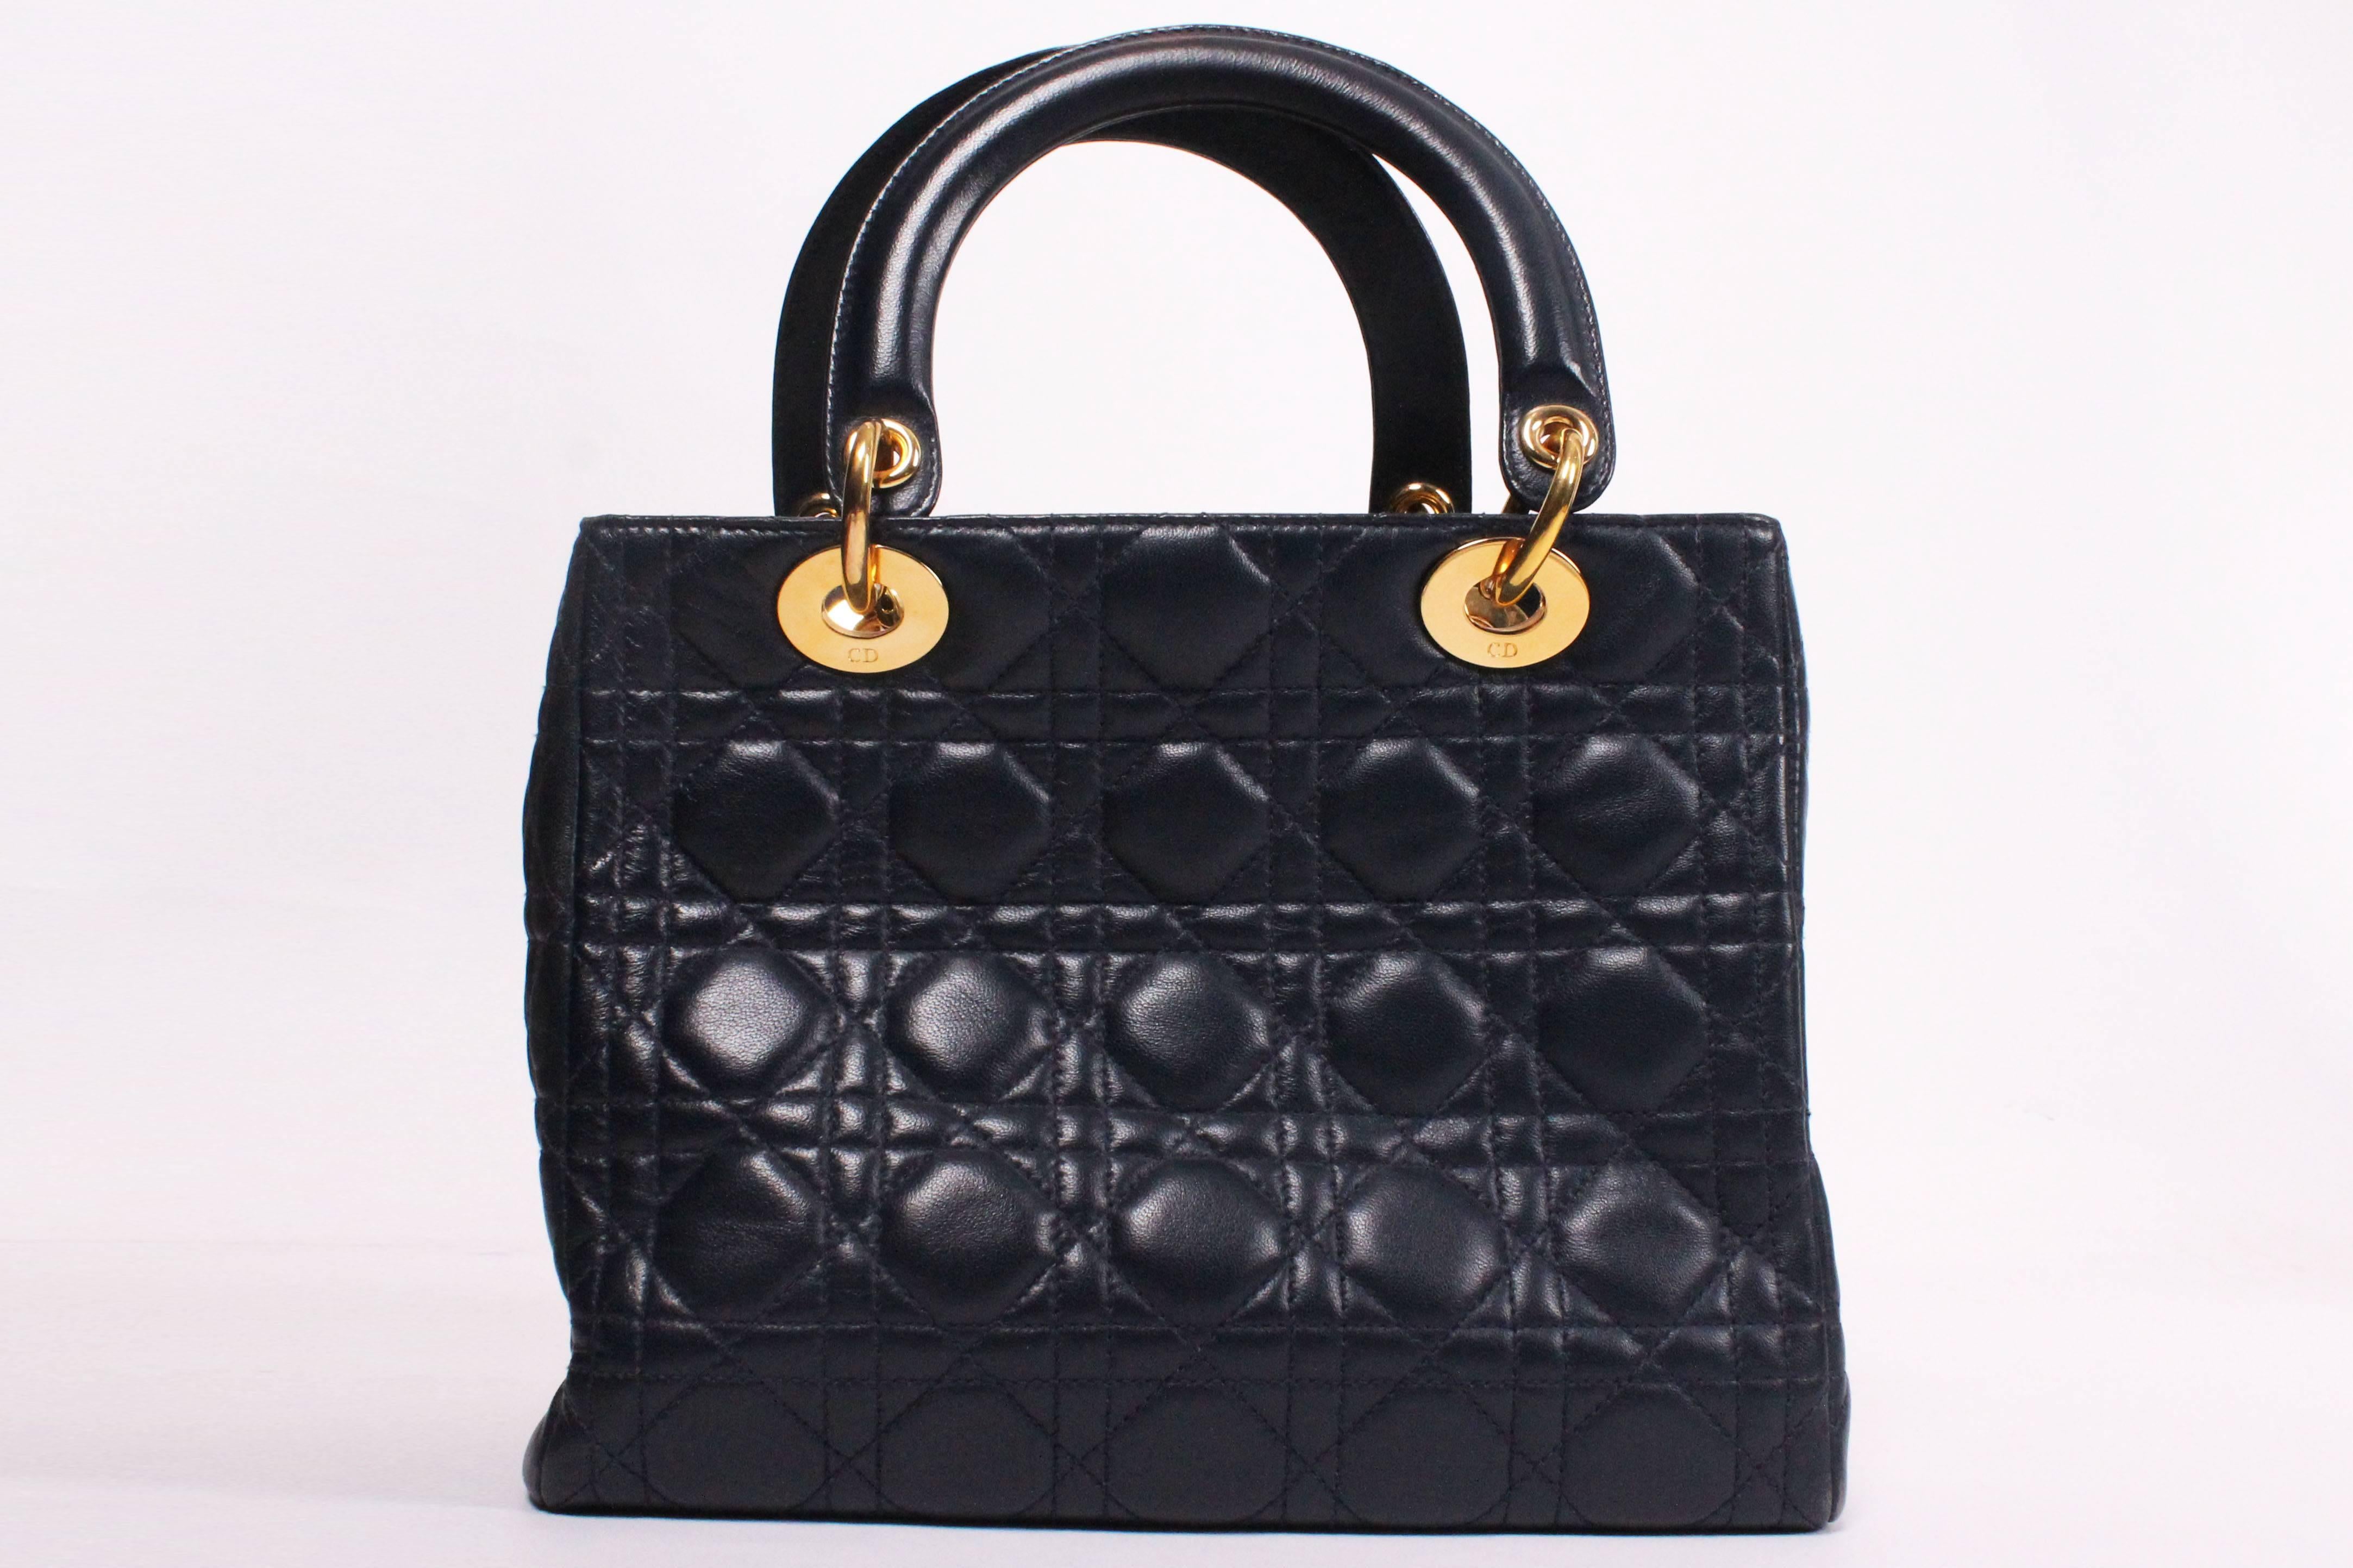 Women's Christian Dior D bag in Navy leather.